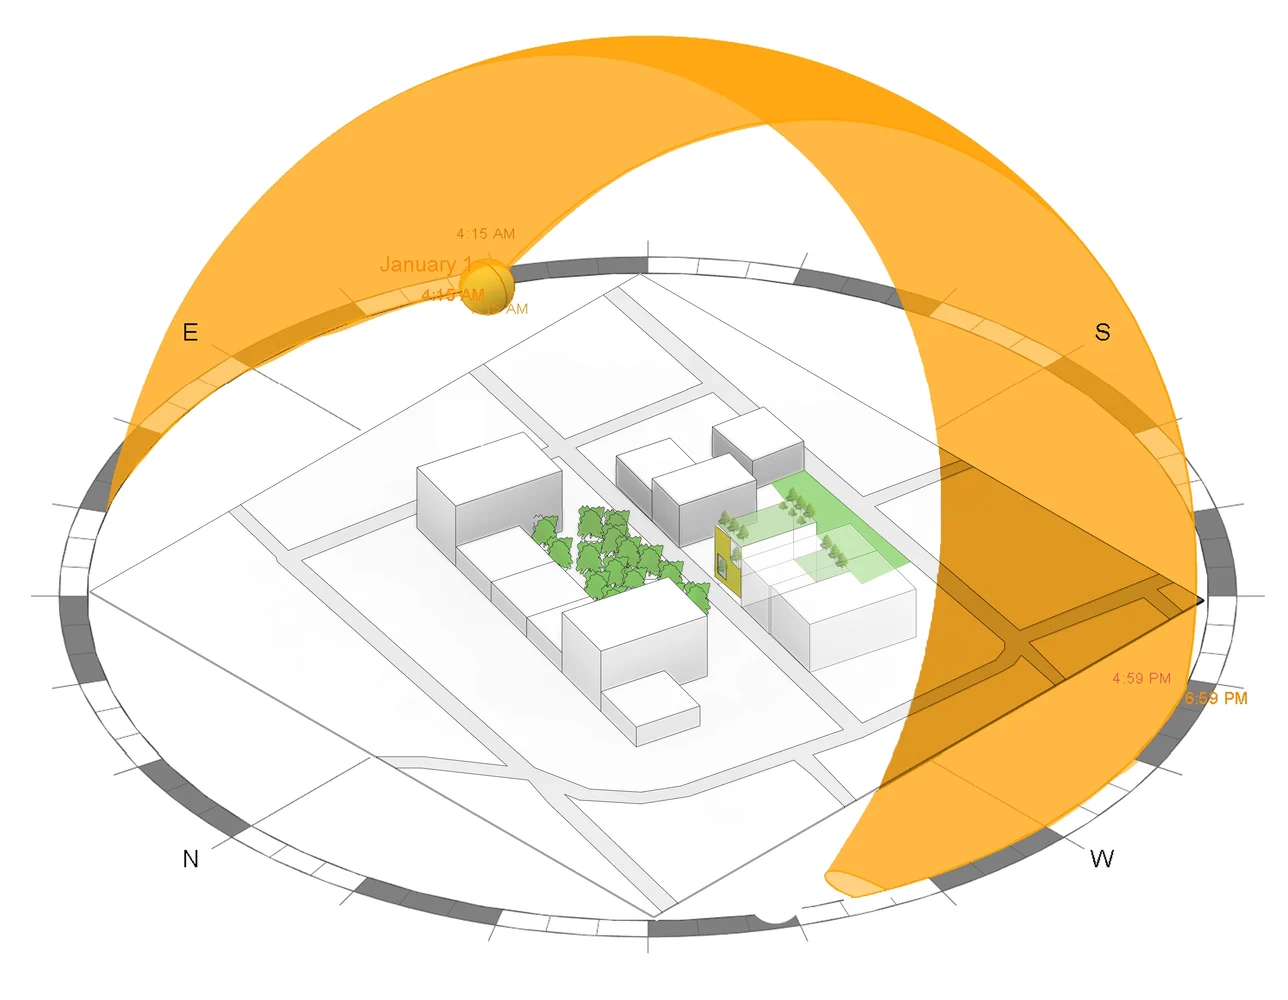 Mapping the sun path for appropriate building orientation